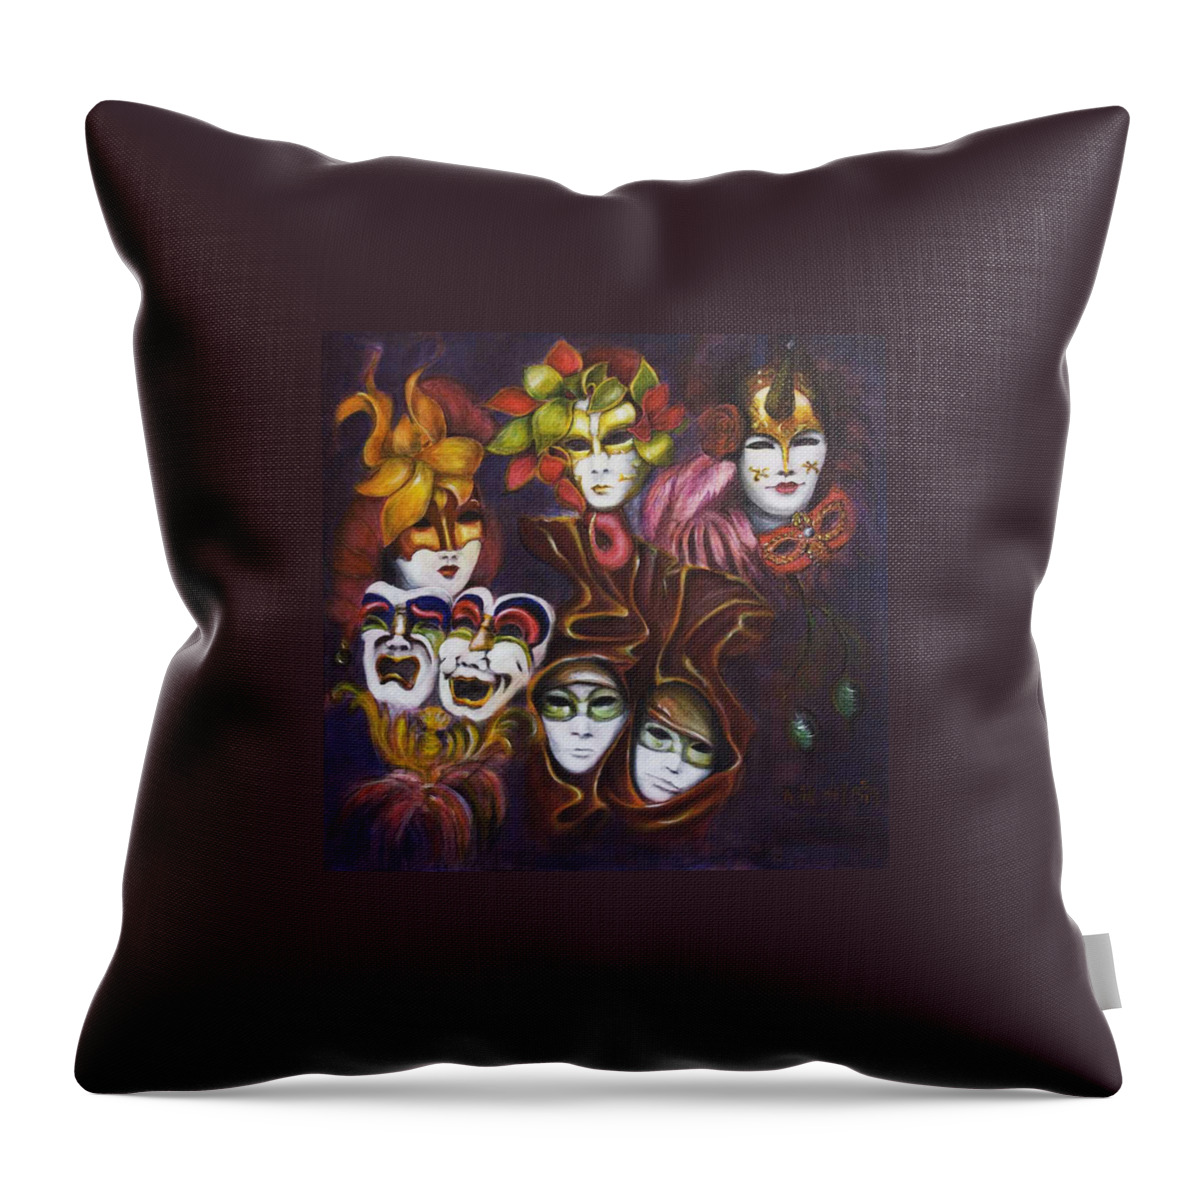 Masks Throw Pillow featuring the painting Making Faces I by Nik Helbig